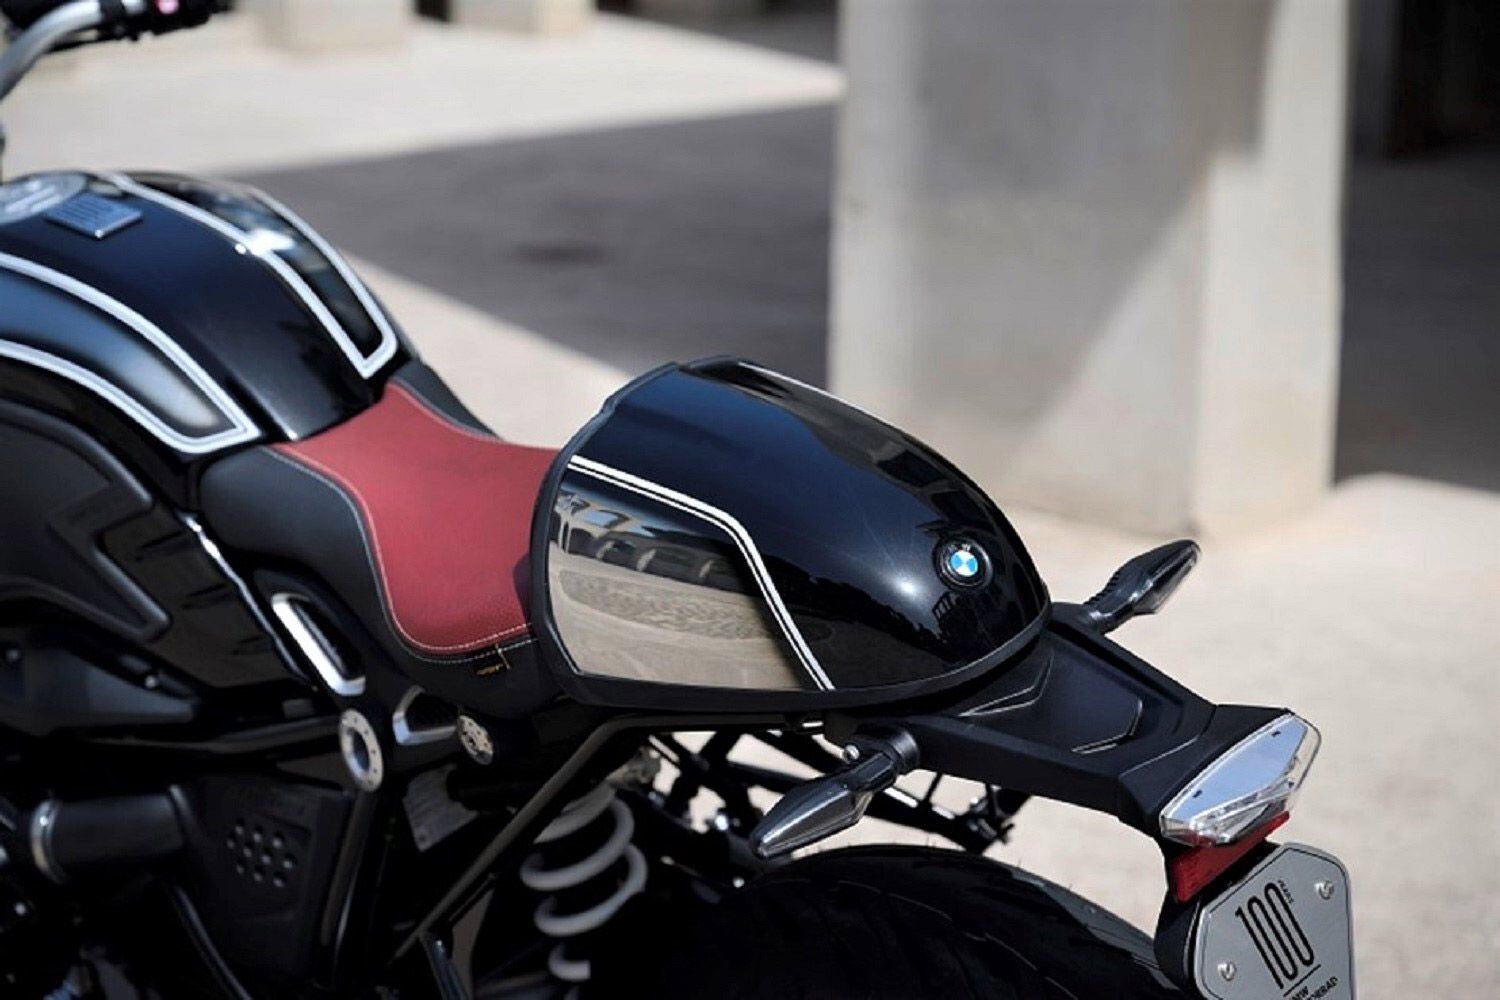 A two-tone black/red seat with backrest caps the R nineT 100 Years’ special features list.